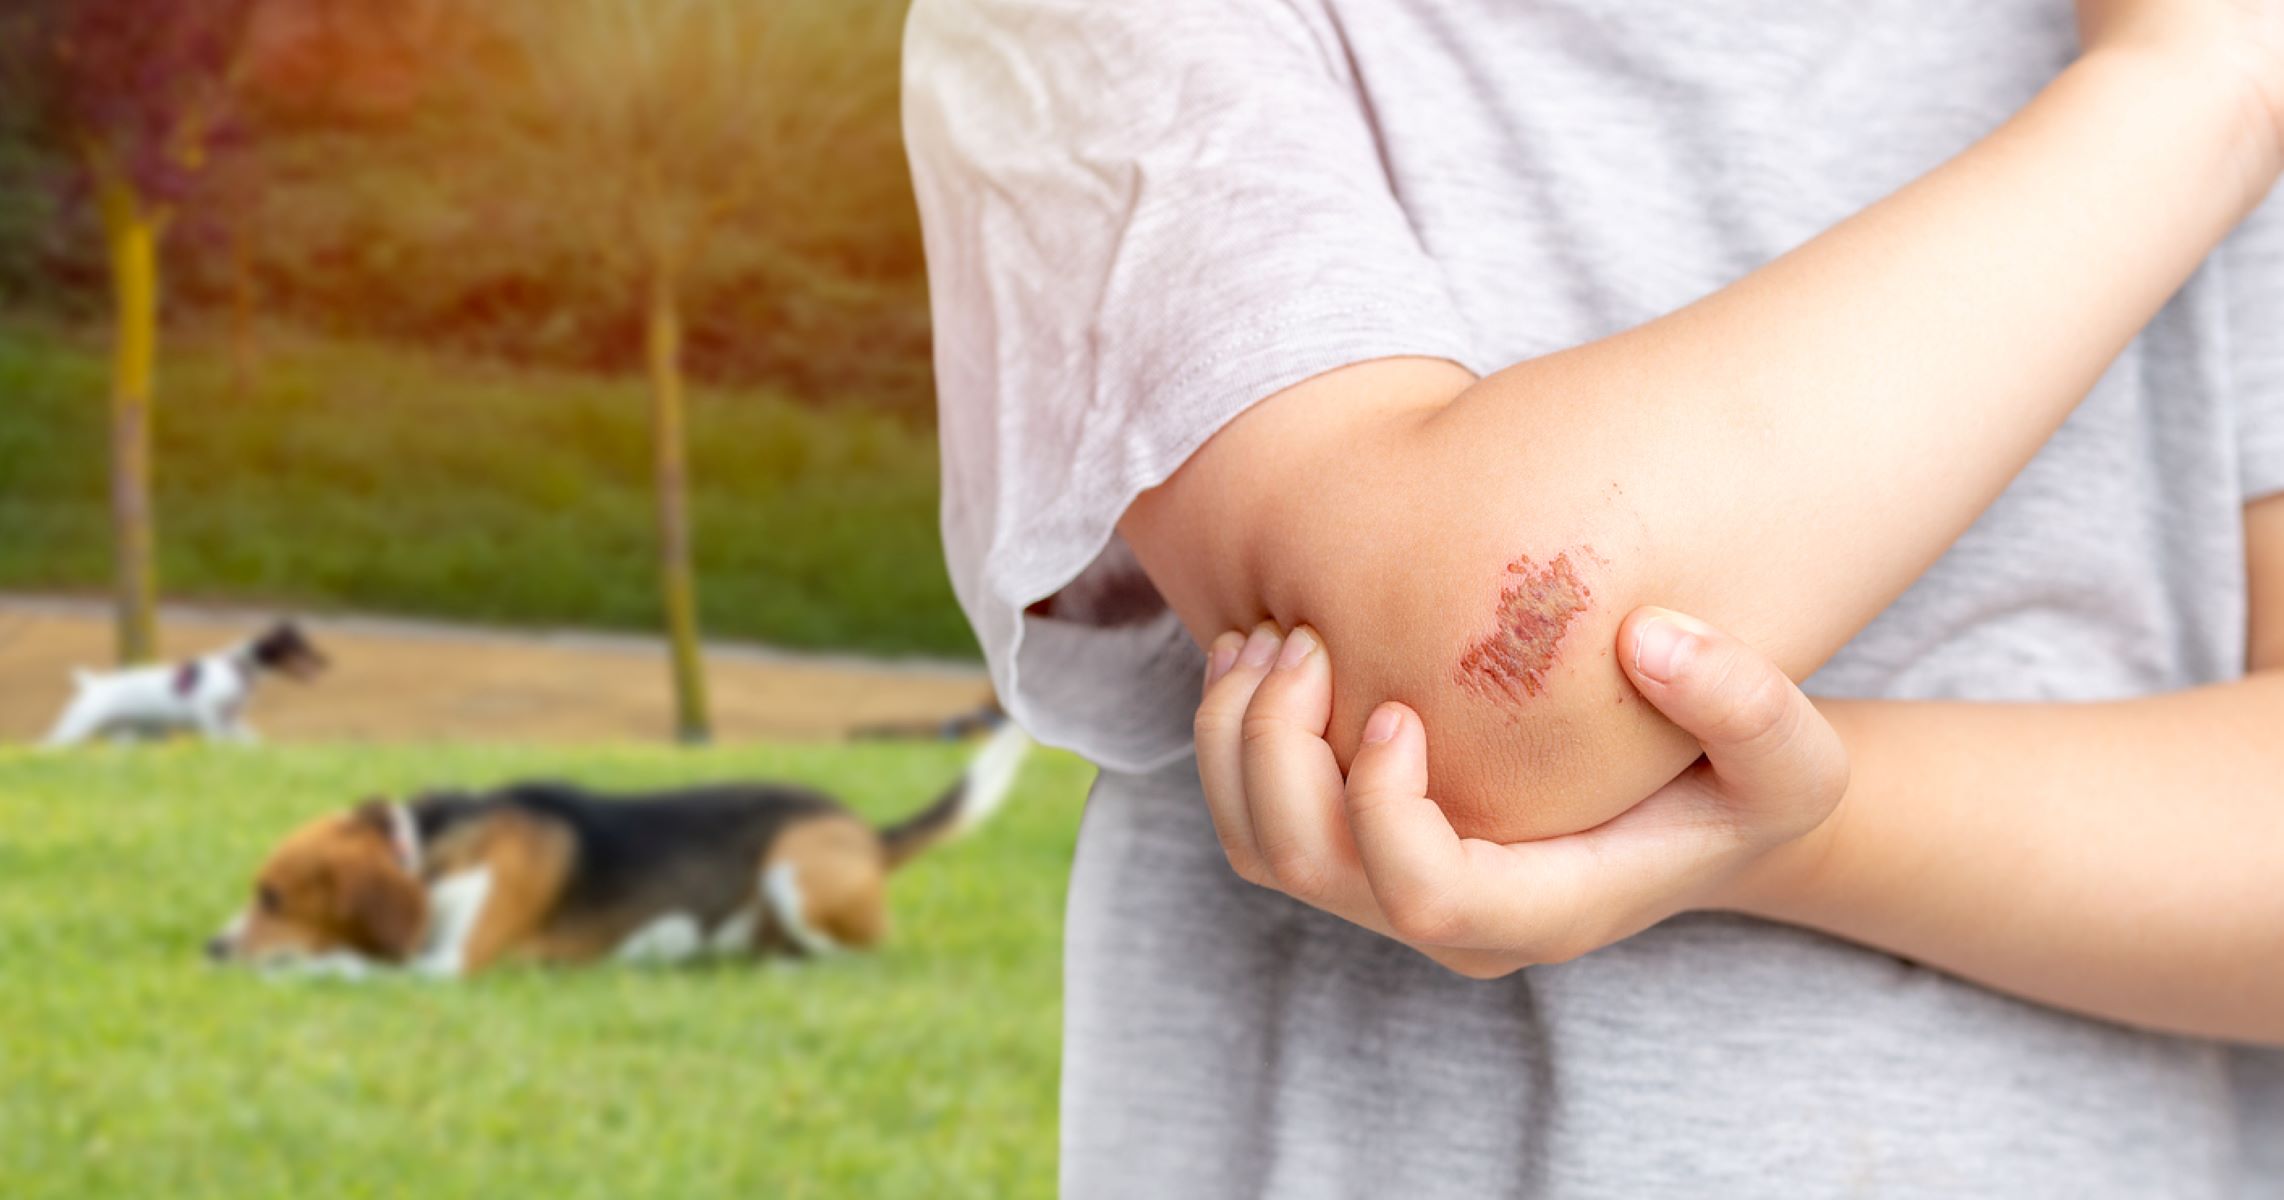 The Shocking Truth About Dog Scratches - You Won't Believe How Dangerous They Can Be!